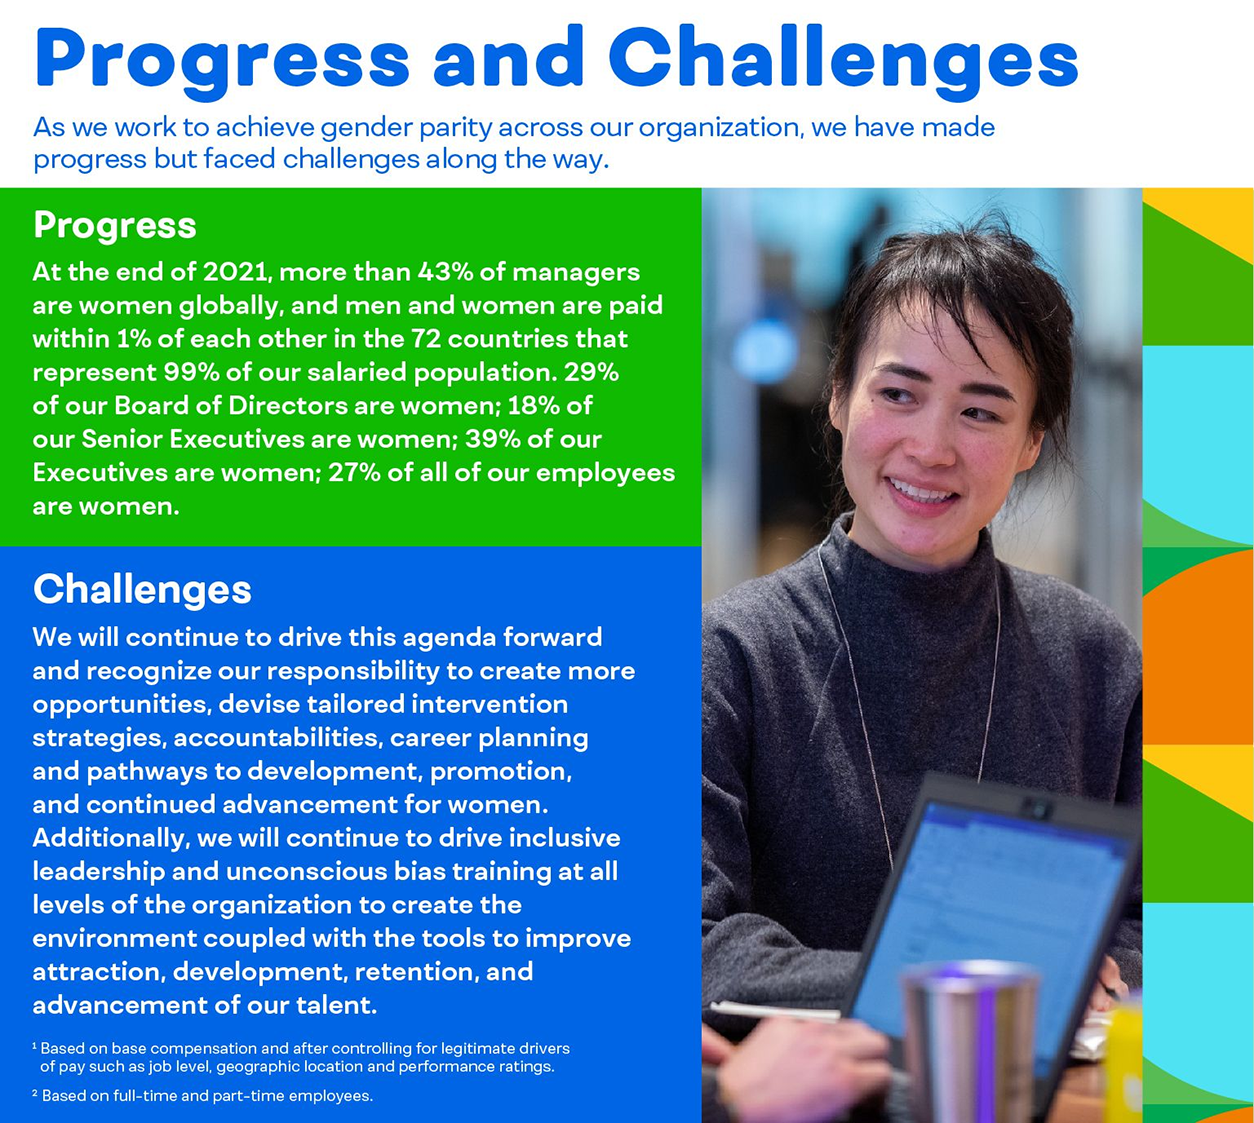 Progress and Challenges: as we work to achieve gender parity across our organization, we have made progress but faced challenges along the way.